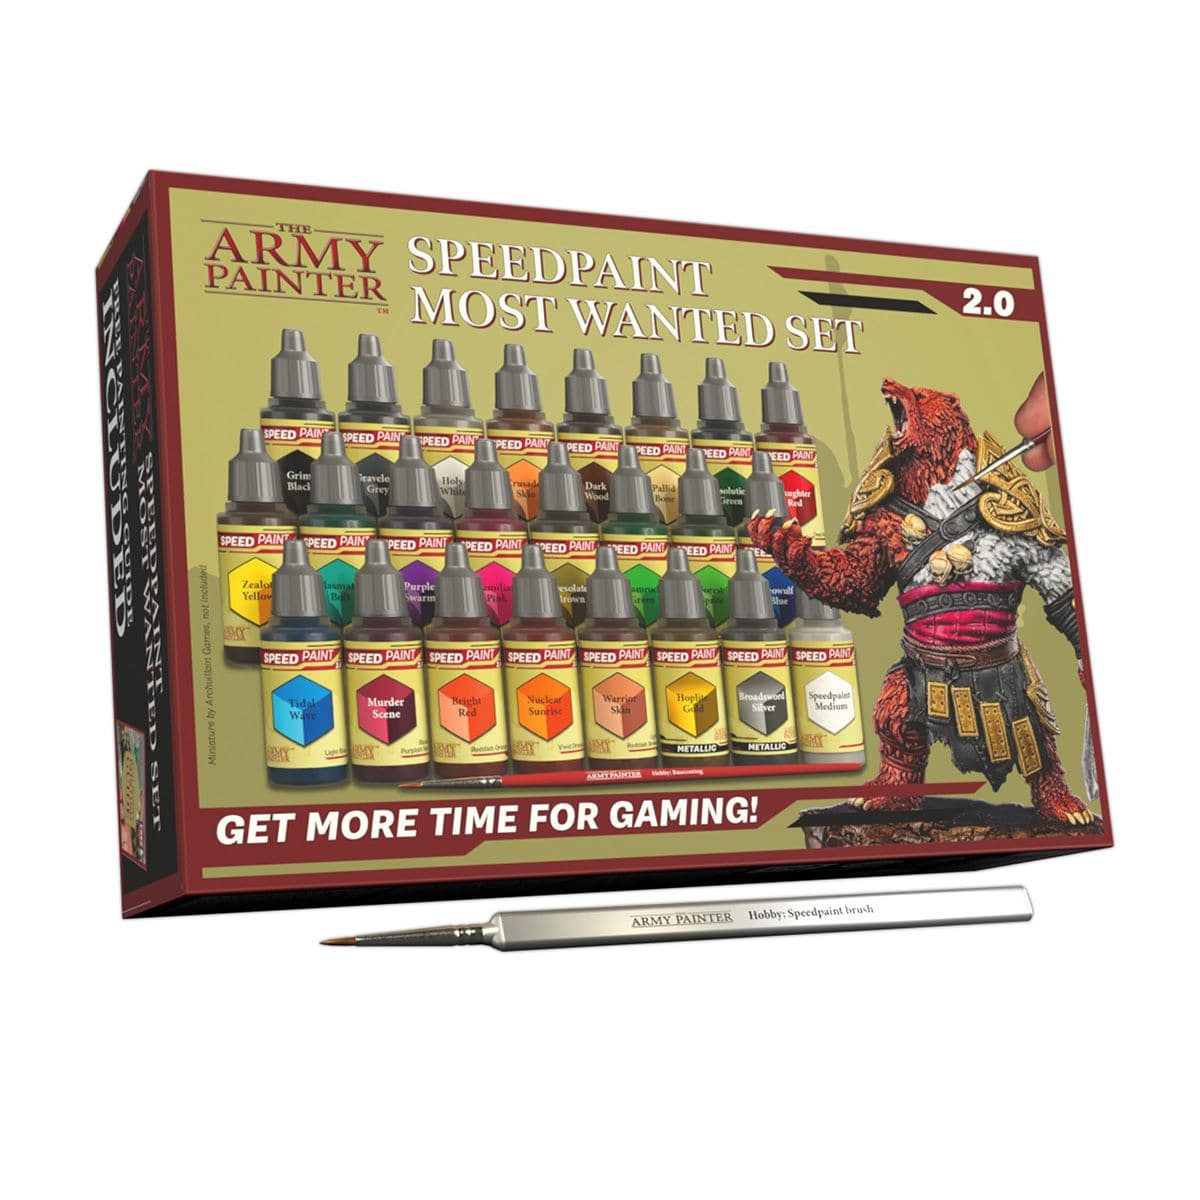 Army Painter: Speedpaint - Most Wanted Set 2.0